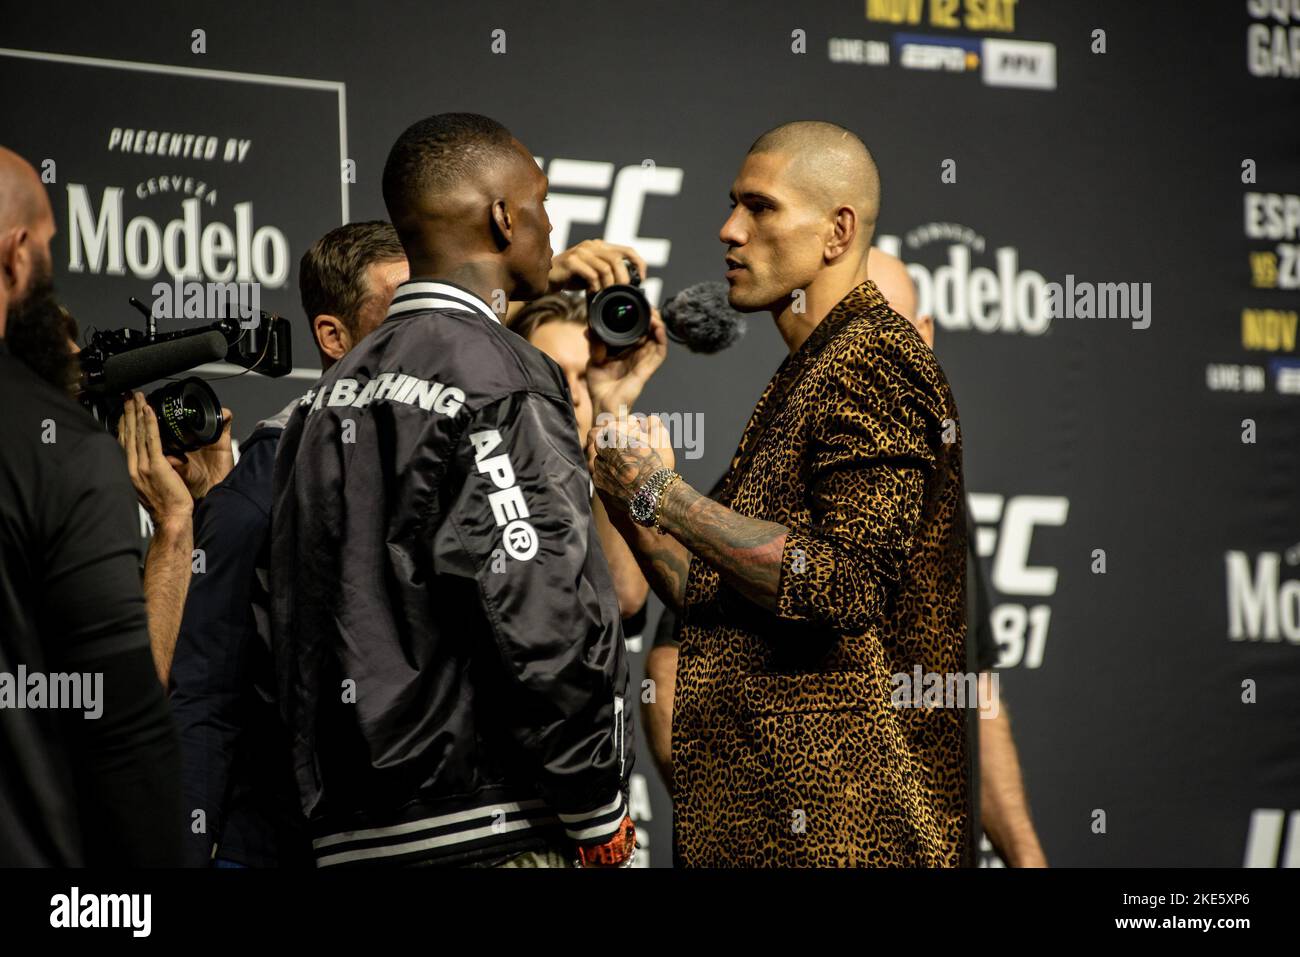 NEW YORK, NY - NOVEMBER 9: Israel Adesanya (Champion) and Alex Pereira face off Ahead of their UFC Middleweight Title bout Saturday night at Madison Square Garden (Photo by Matt Davies/PxImages) Stock Photo